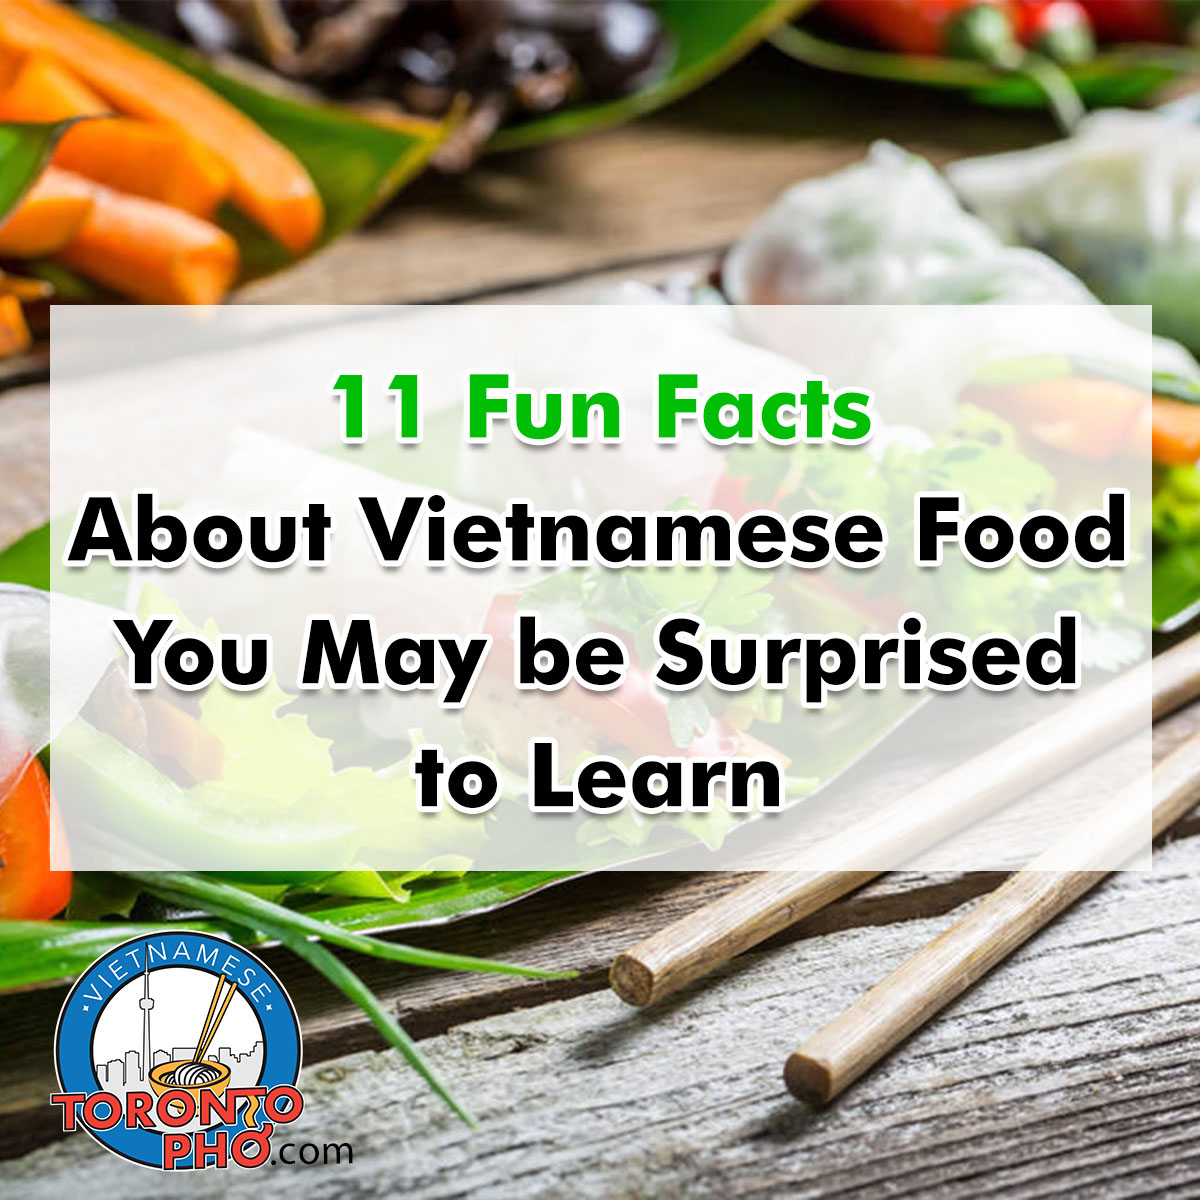 11 Fun Facts About Vietnamese Food - Explore More!